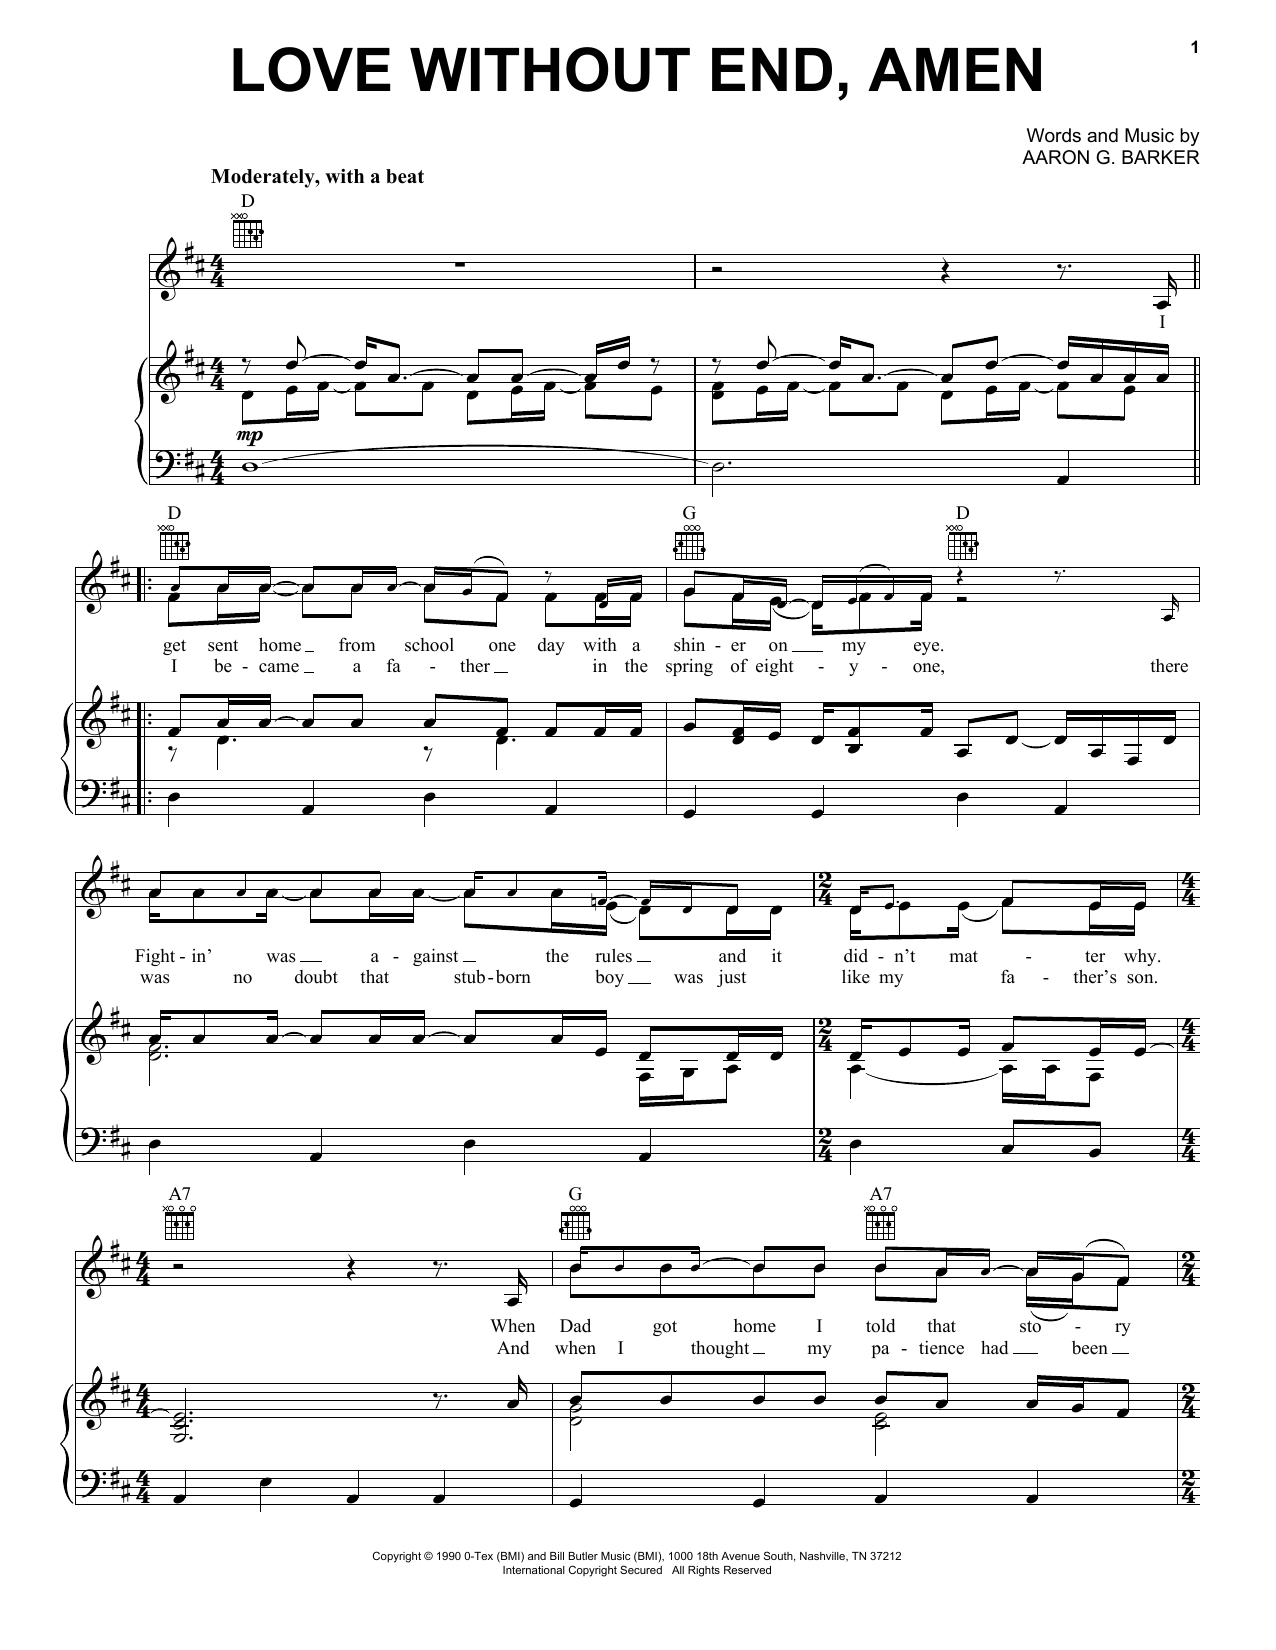 Download George Strait Love Without End, Amen Sheet Music